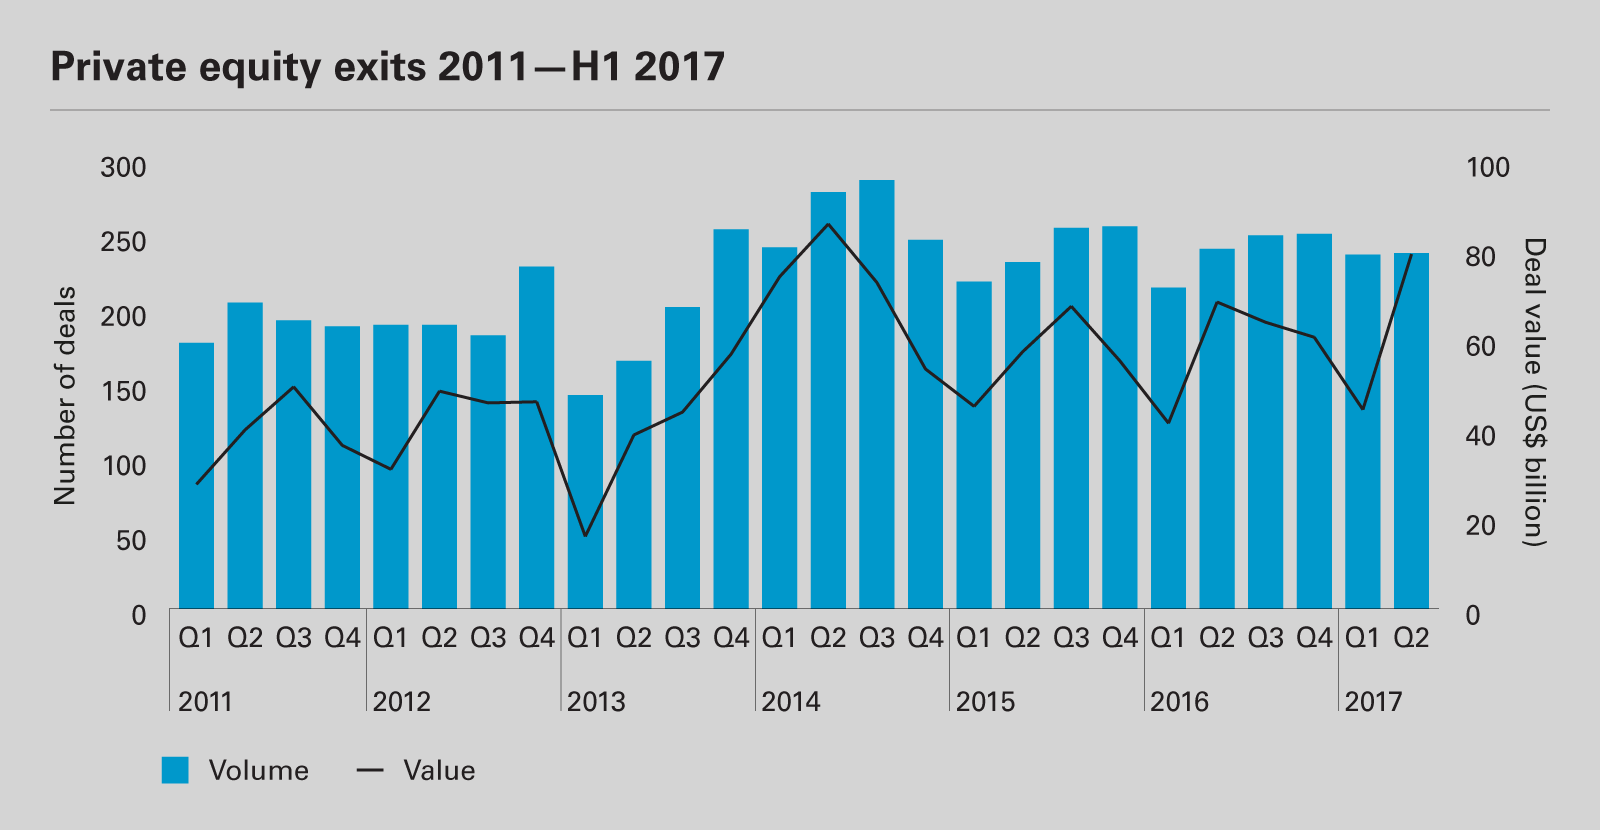 Private equity exits 2011 - H1 2017